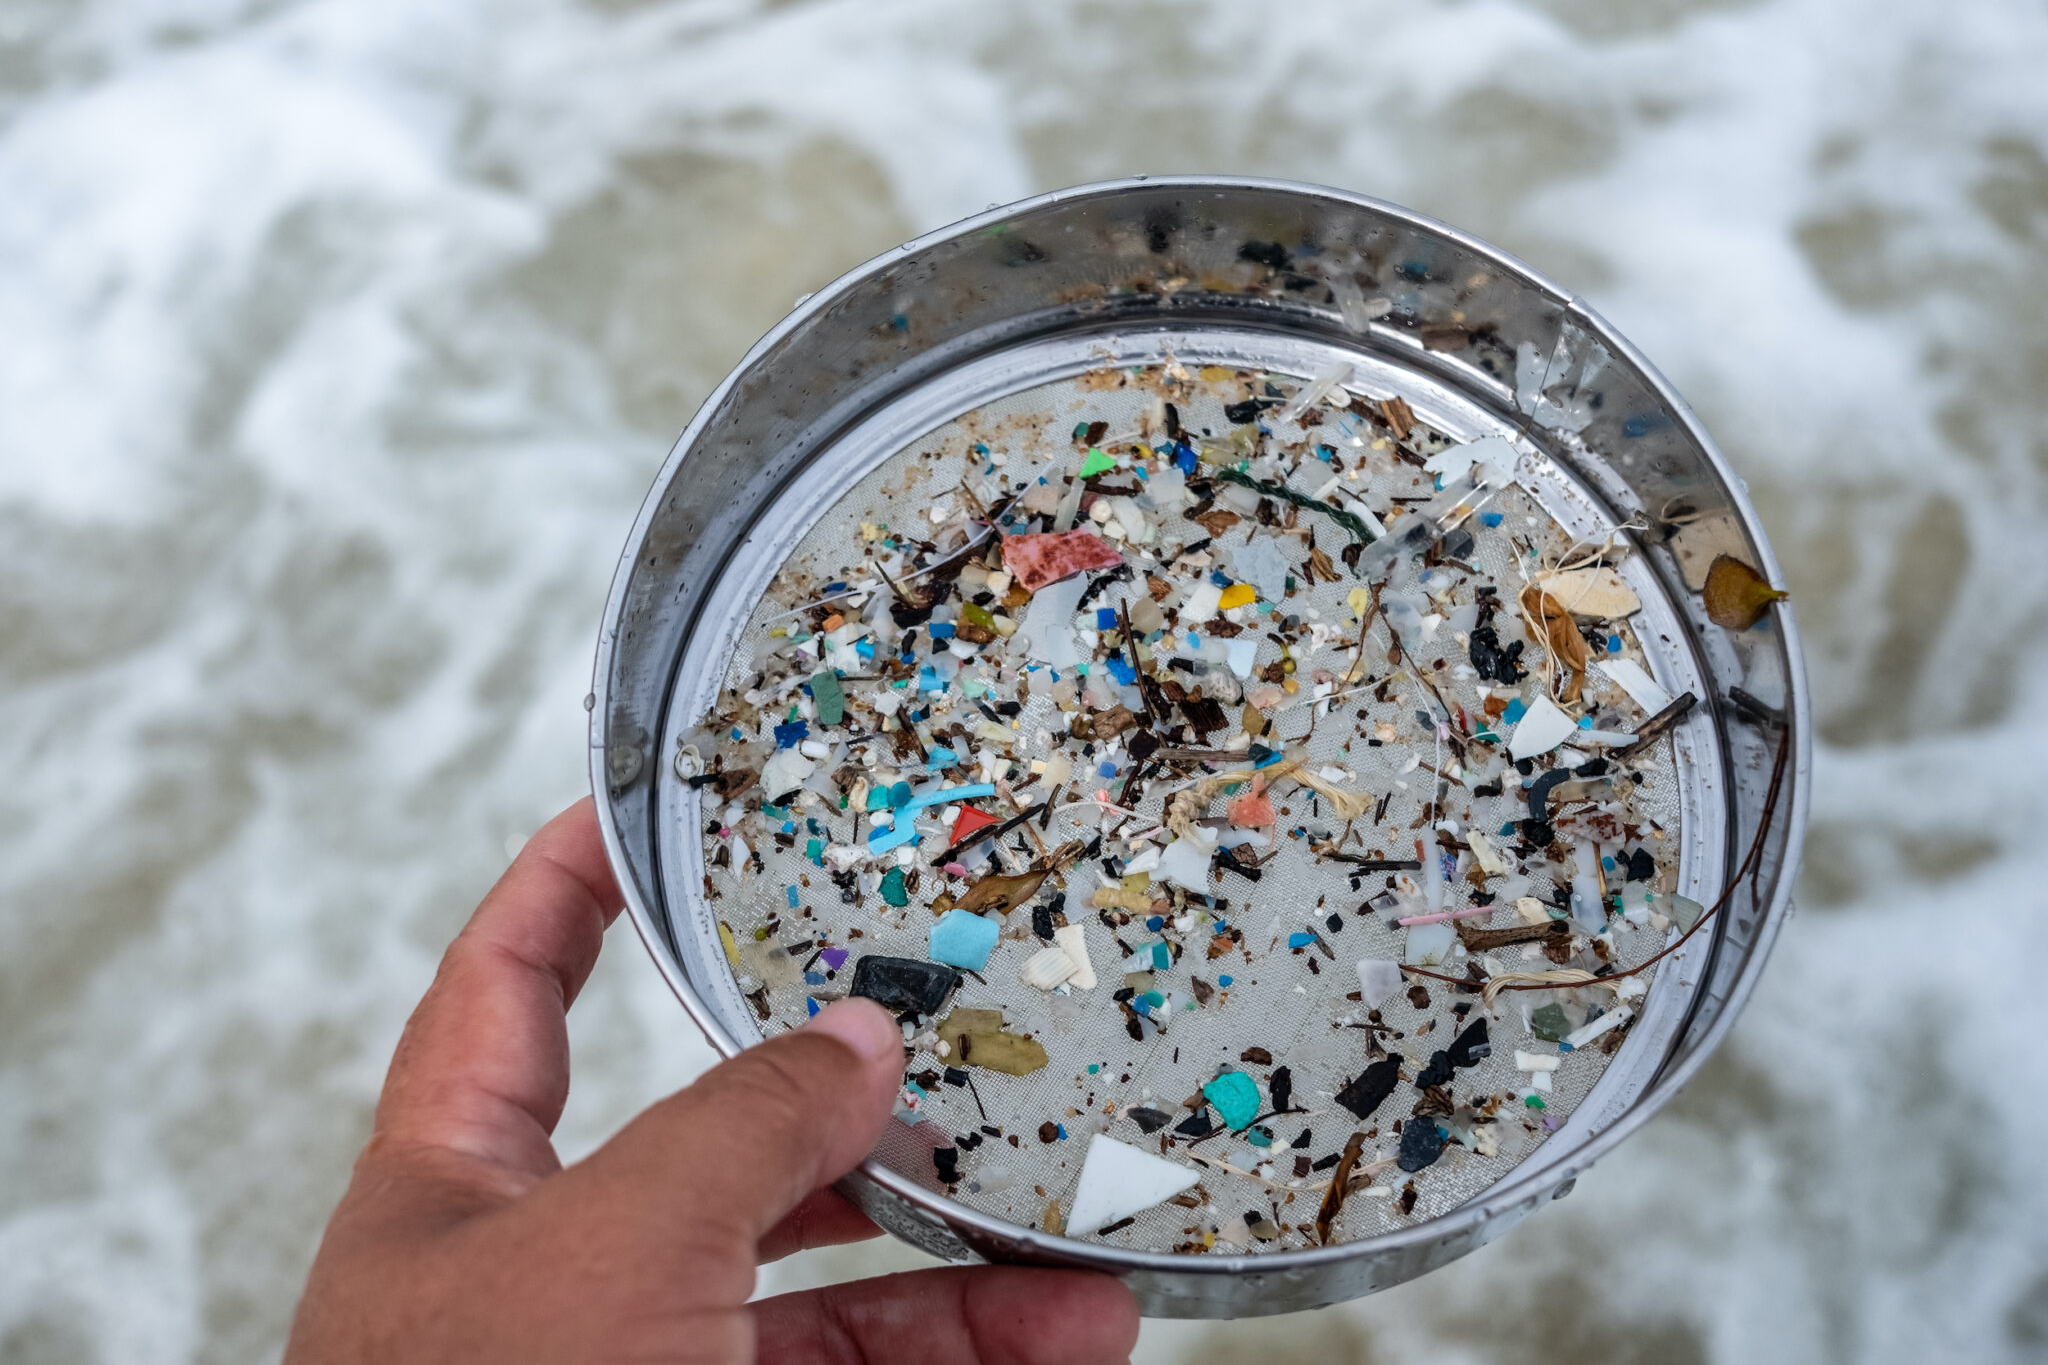 Microplastics found while doing a beach cleanup